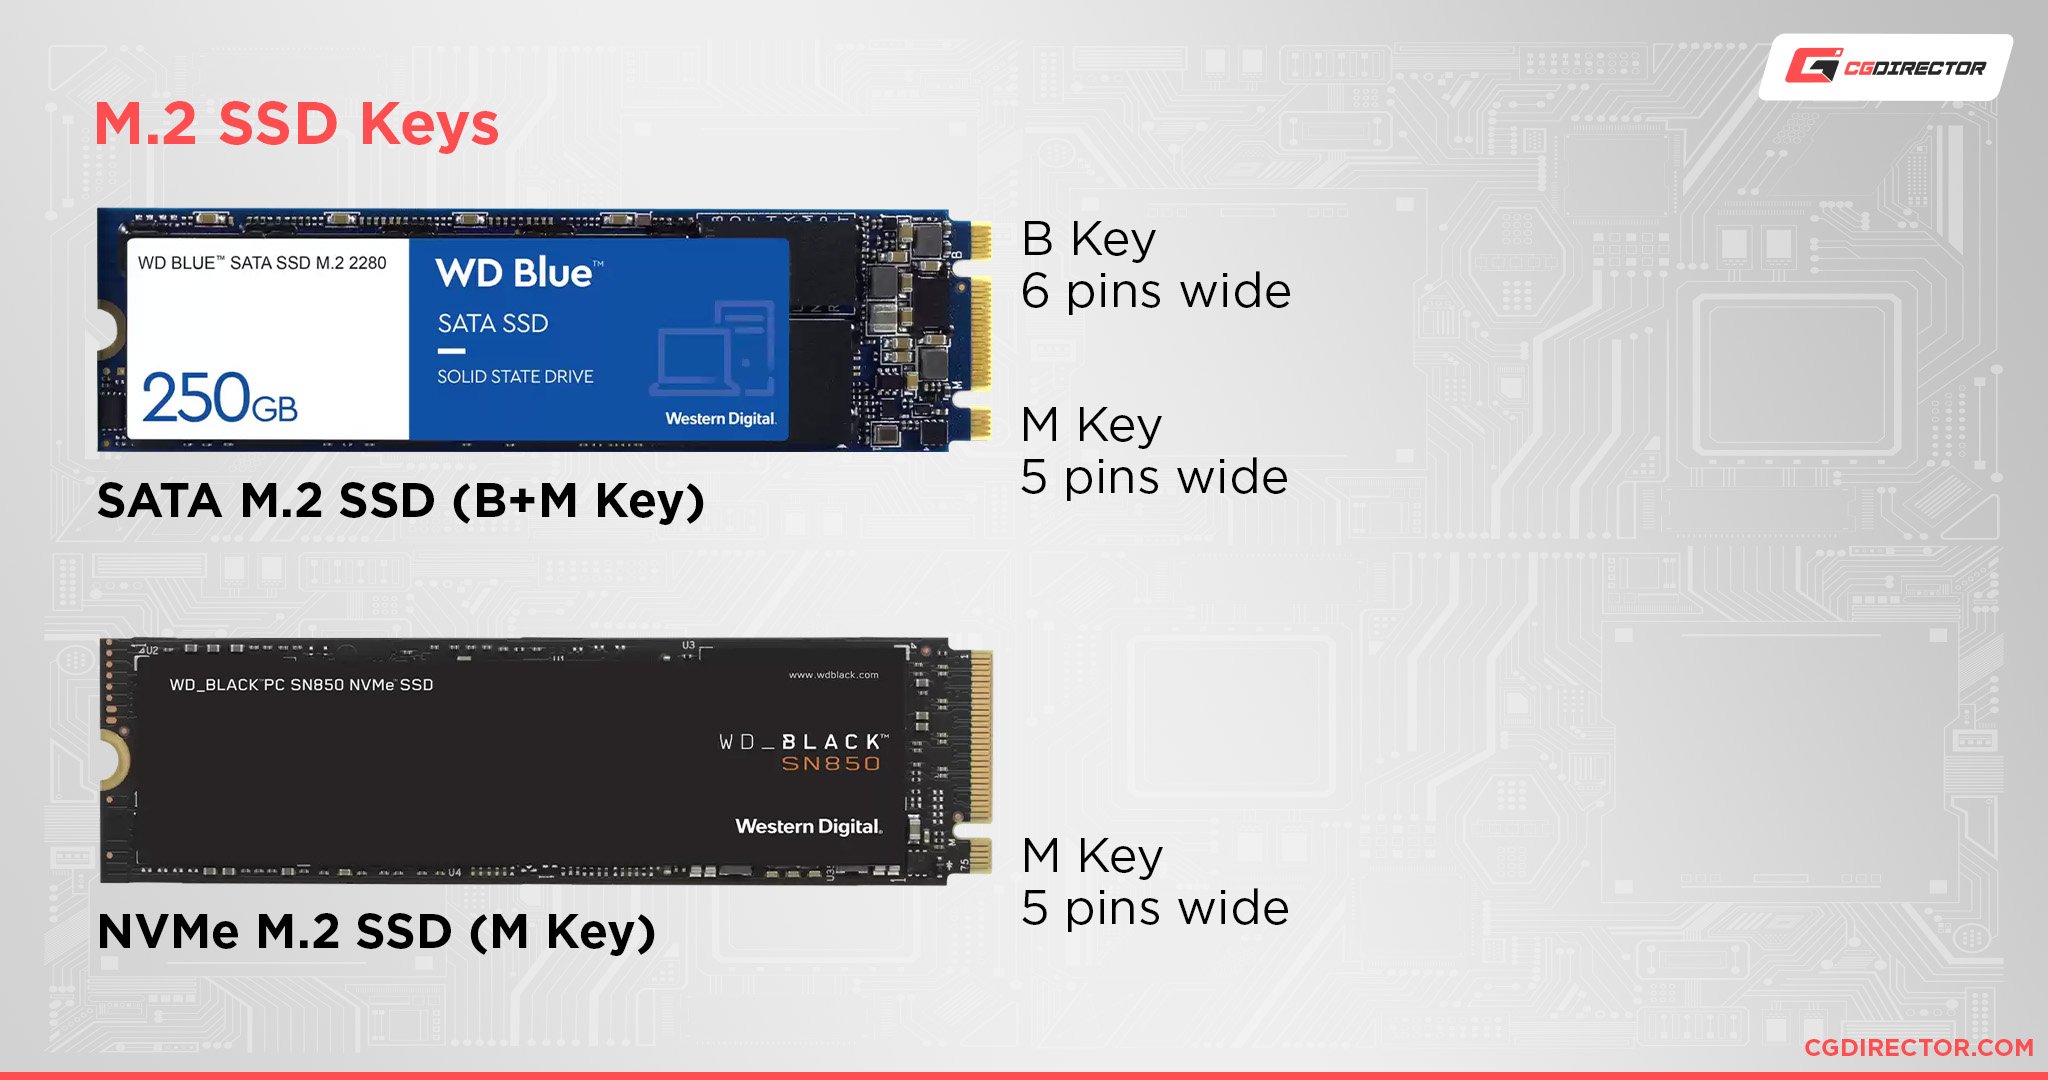 What is an M.2 SSD?